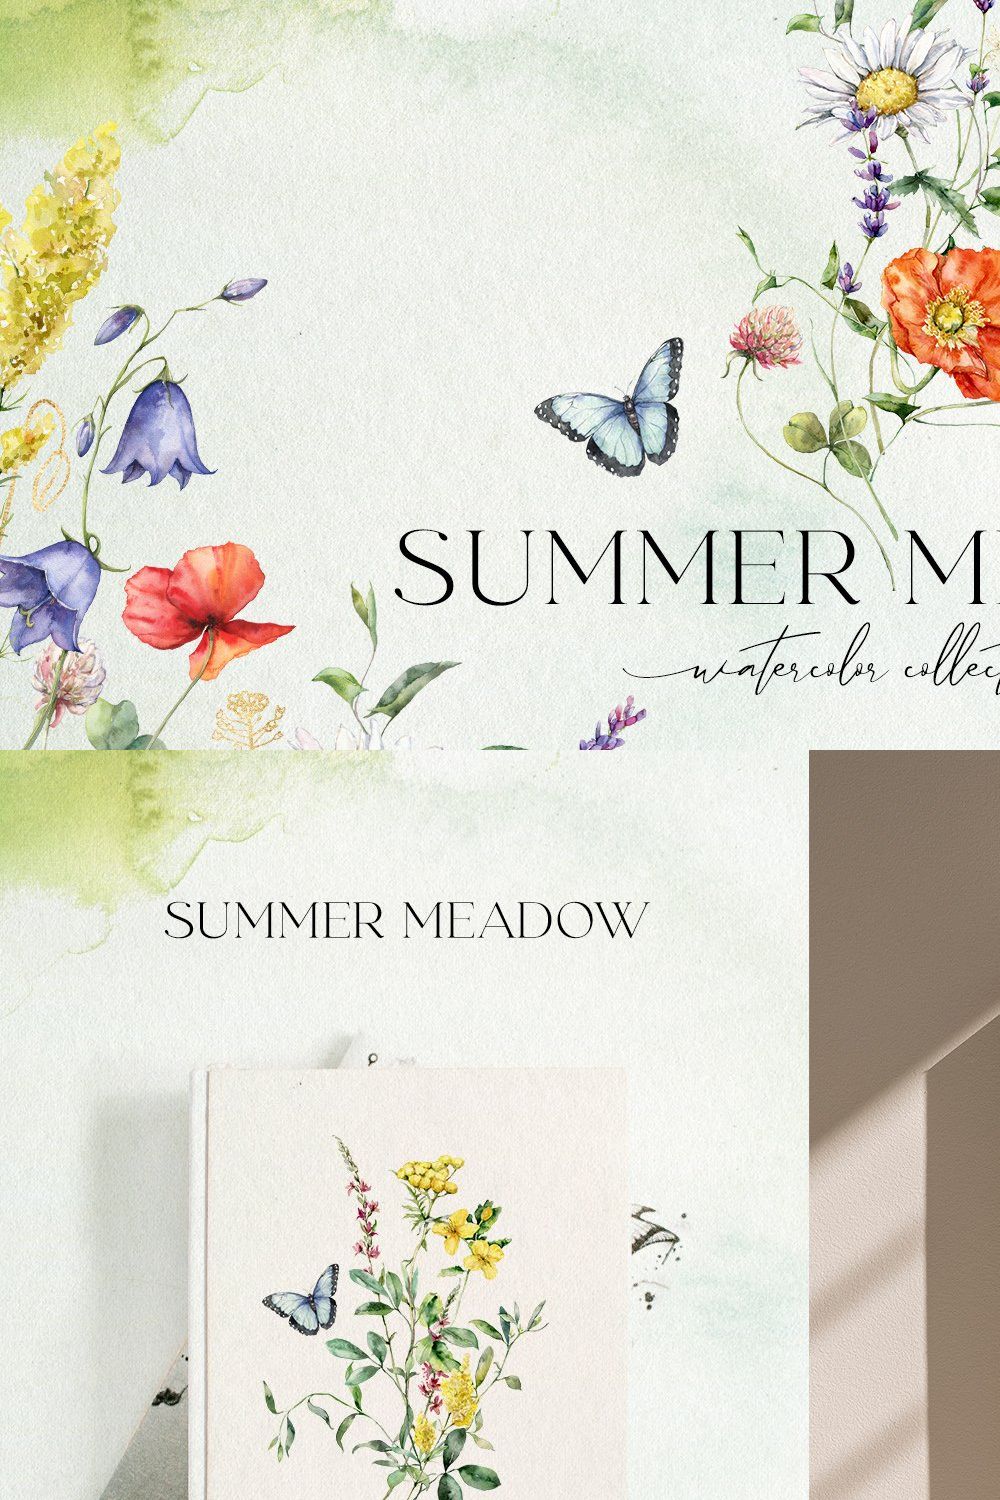 SUMMER MEADOW wildflower watercolor pinterest preview image.